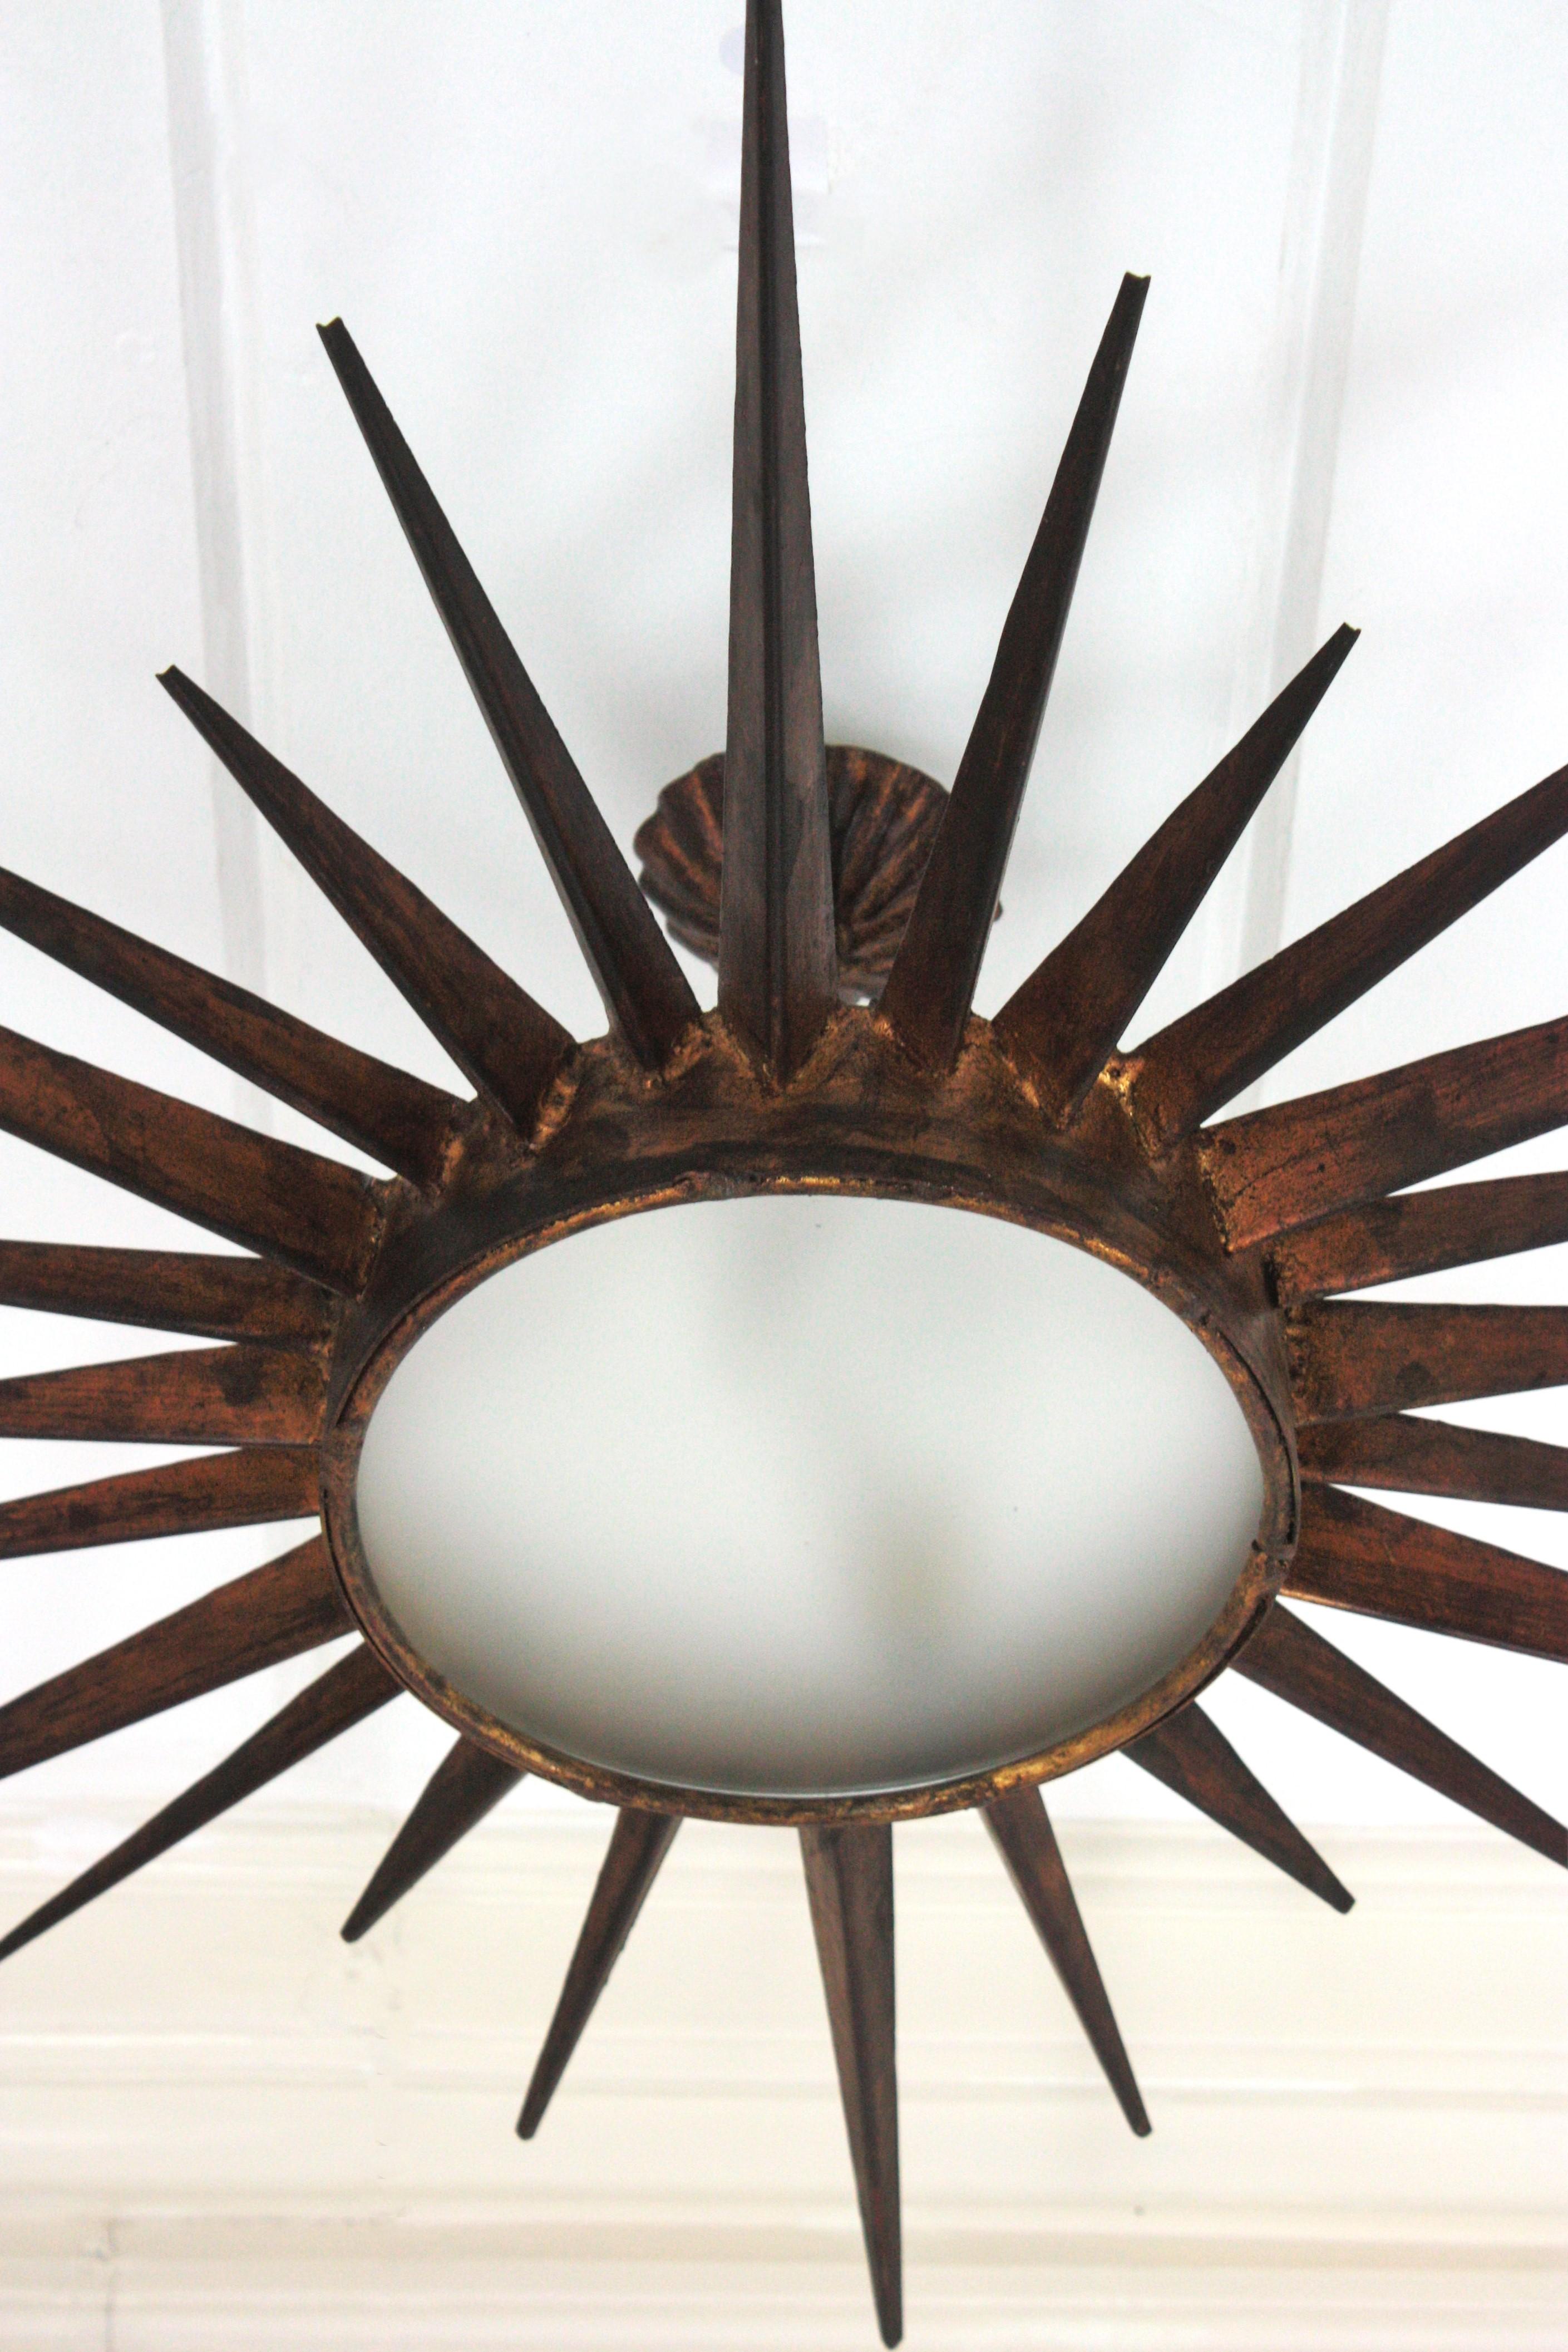 Forged French Gilt Starburst Sunburst Light Fixture in Wrought Iron, Poillerat Style For Sale